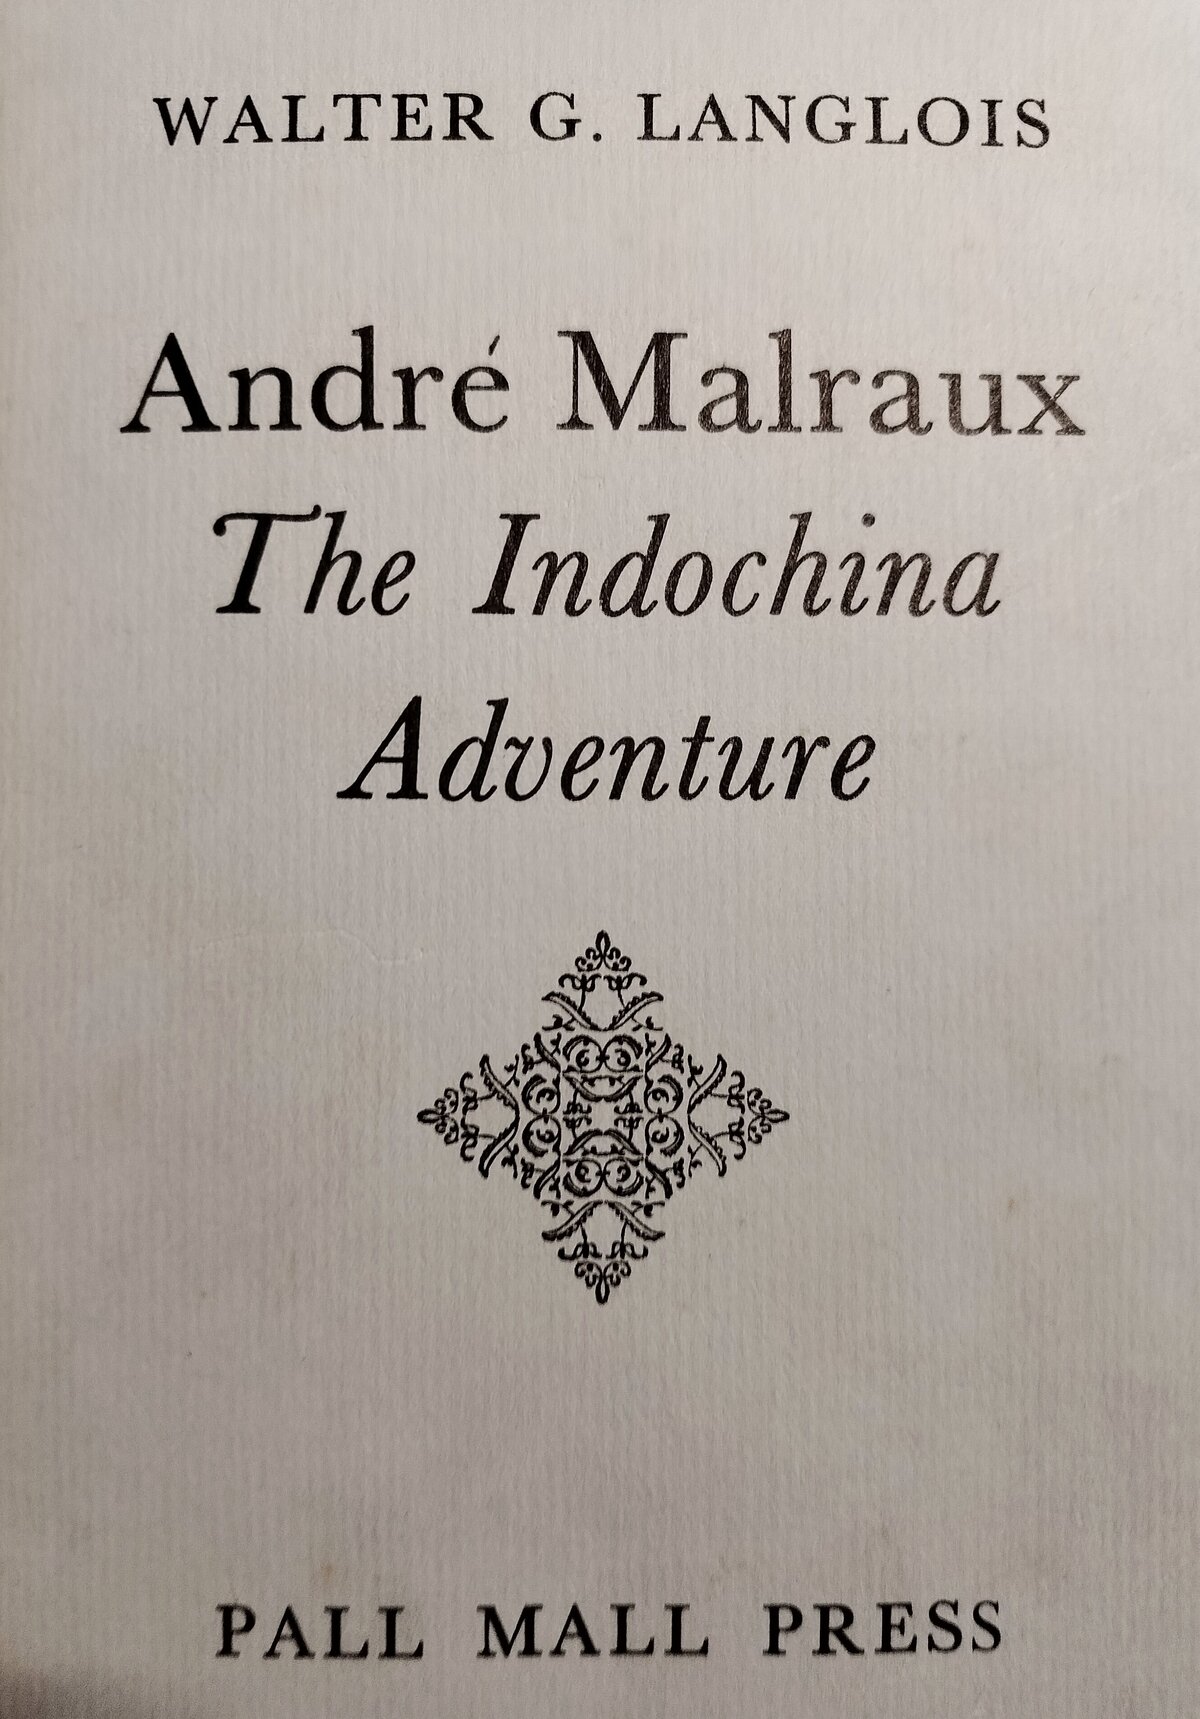 Langlois&#x20;malraux&#x20;cover